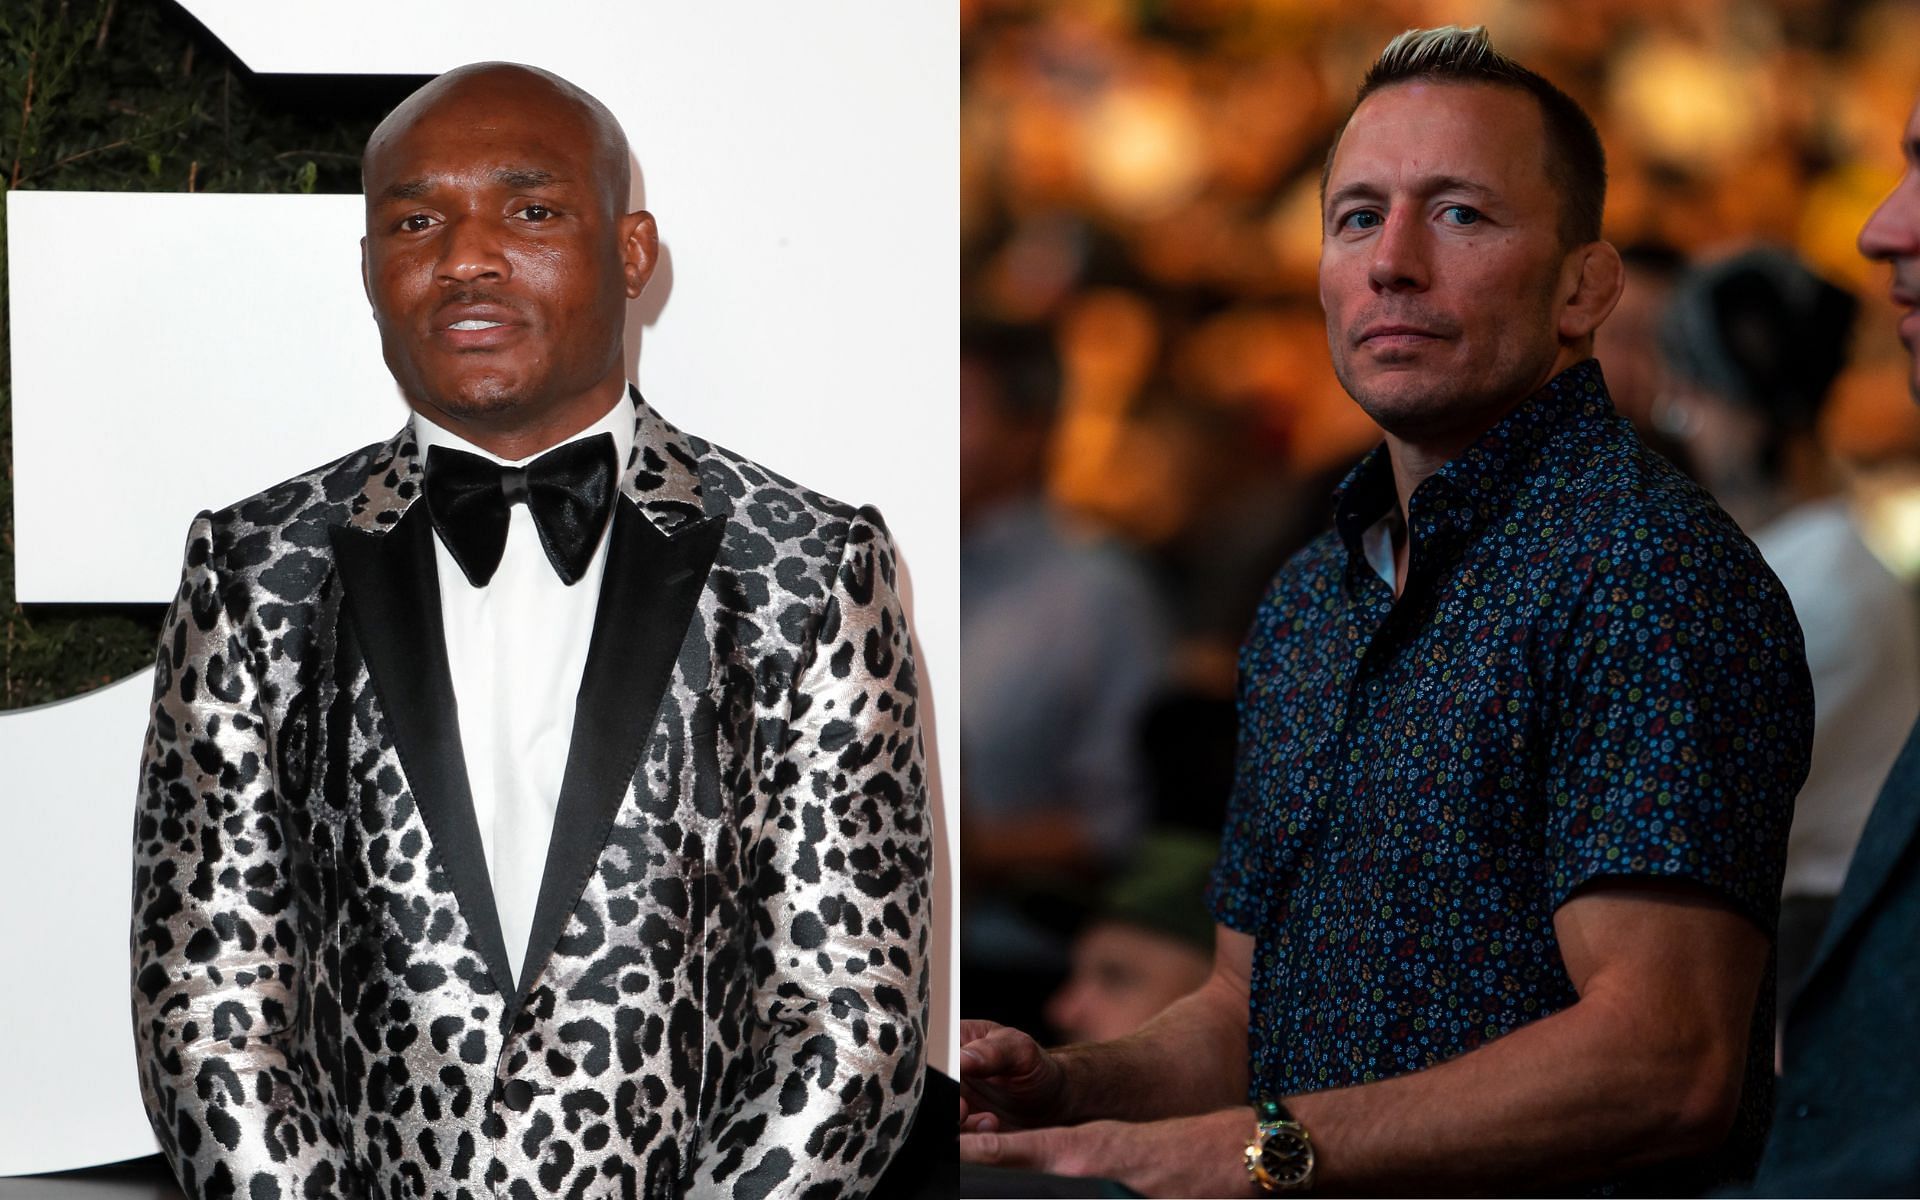 Kamaru Usman (left) is heralded as a future UFC Hall of Famer, whereas Georges St-Pierre (right) has already been inducted into the UFC Hall of Fame [Images courtesy: Getty Images]